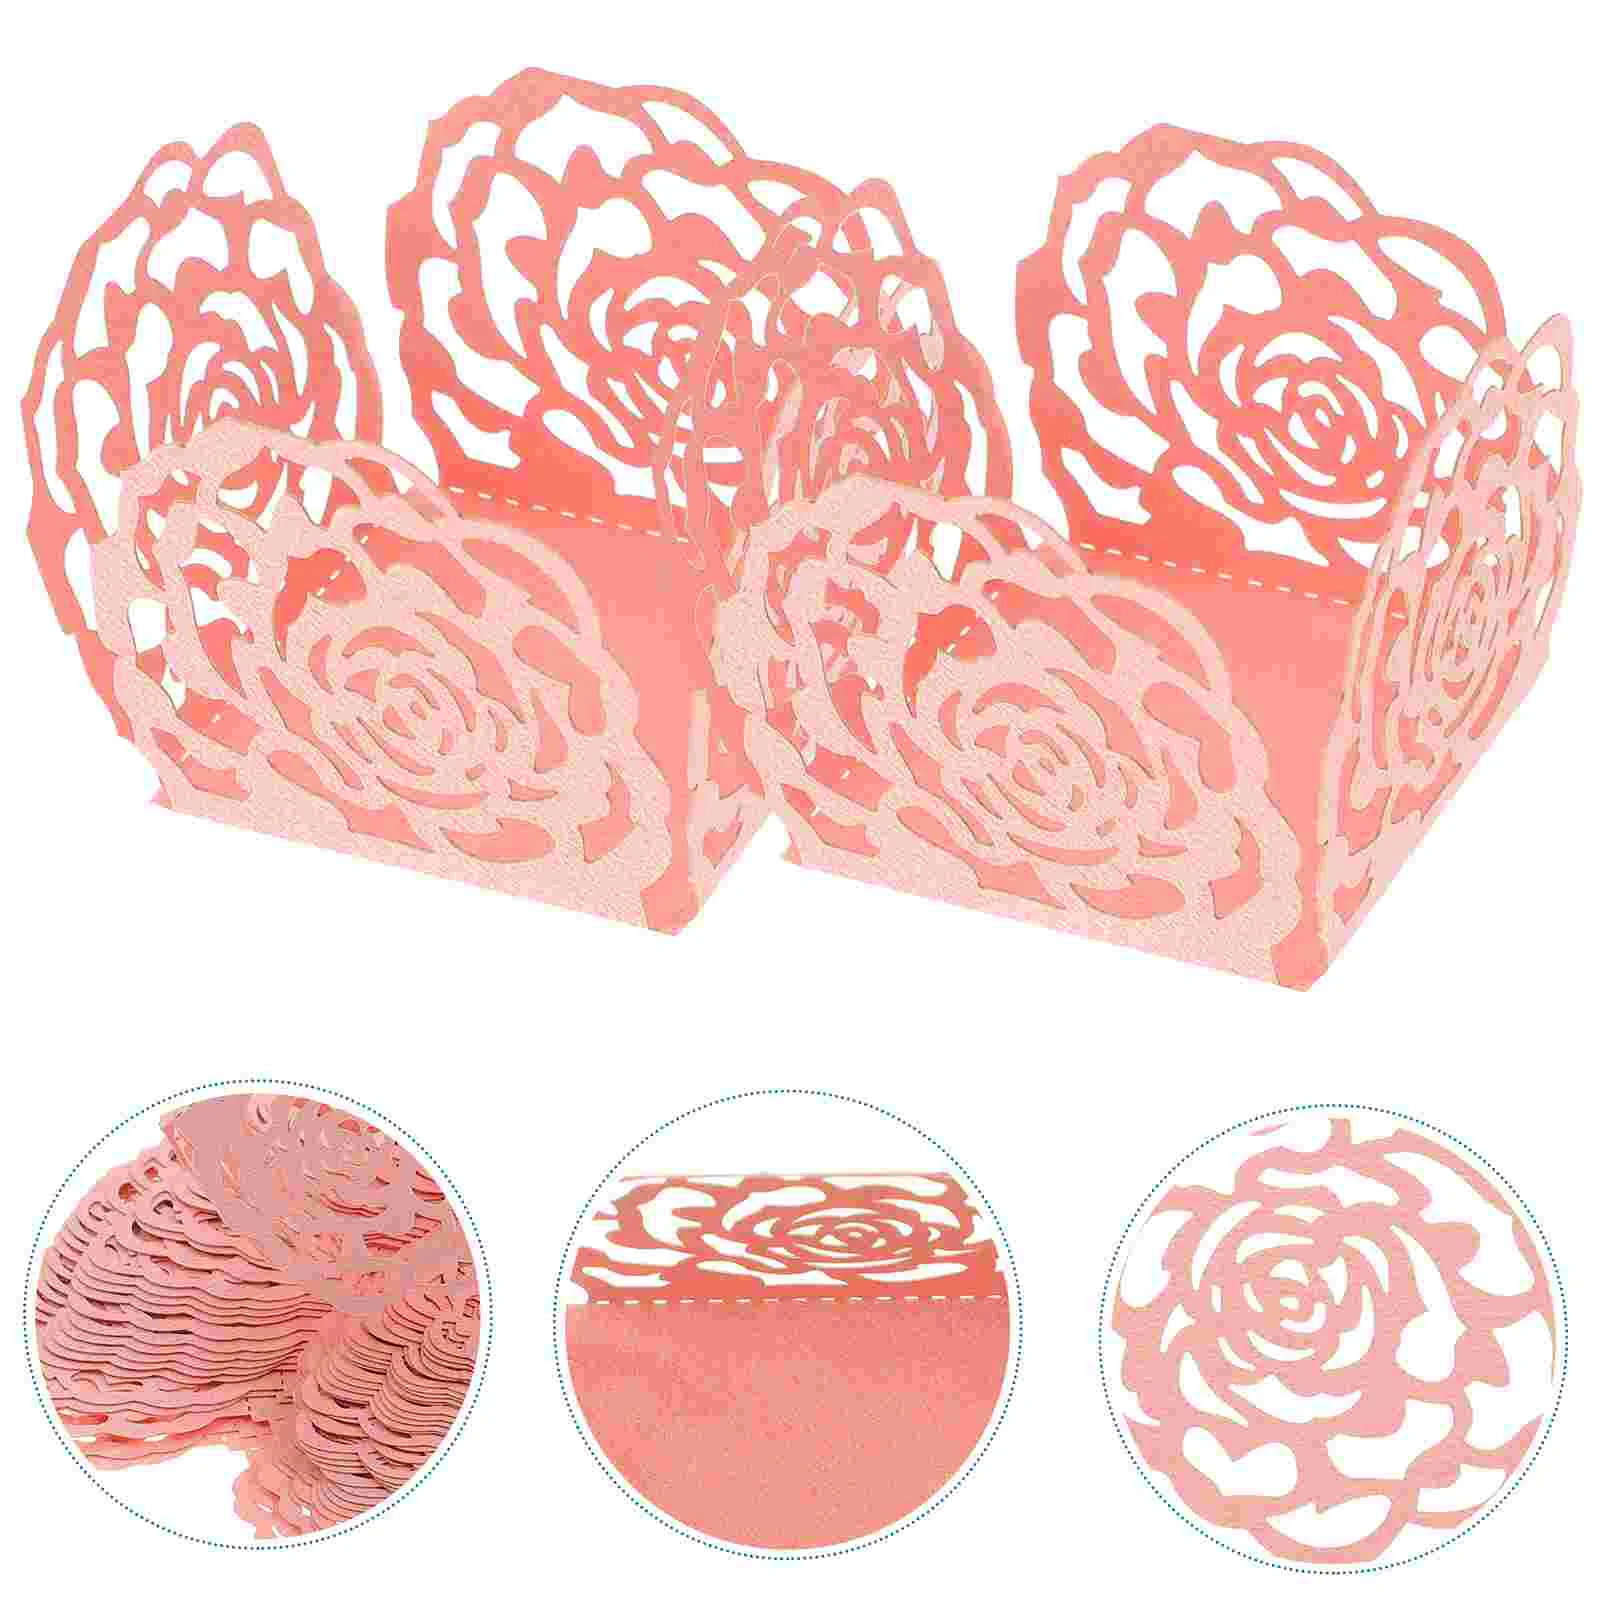 

50 Pcs Chocolate Tray Decorative Cups Table Party Kraft Wrapping Paper Supply Dinning Truffle Box Candies Cupcake